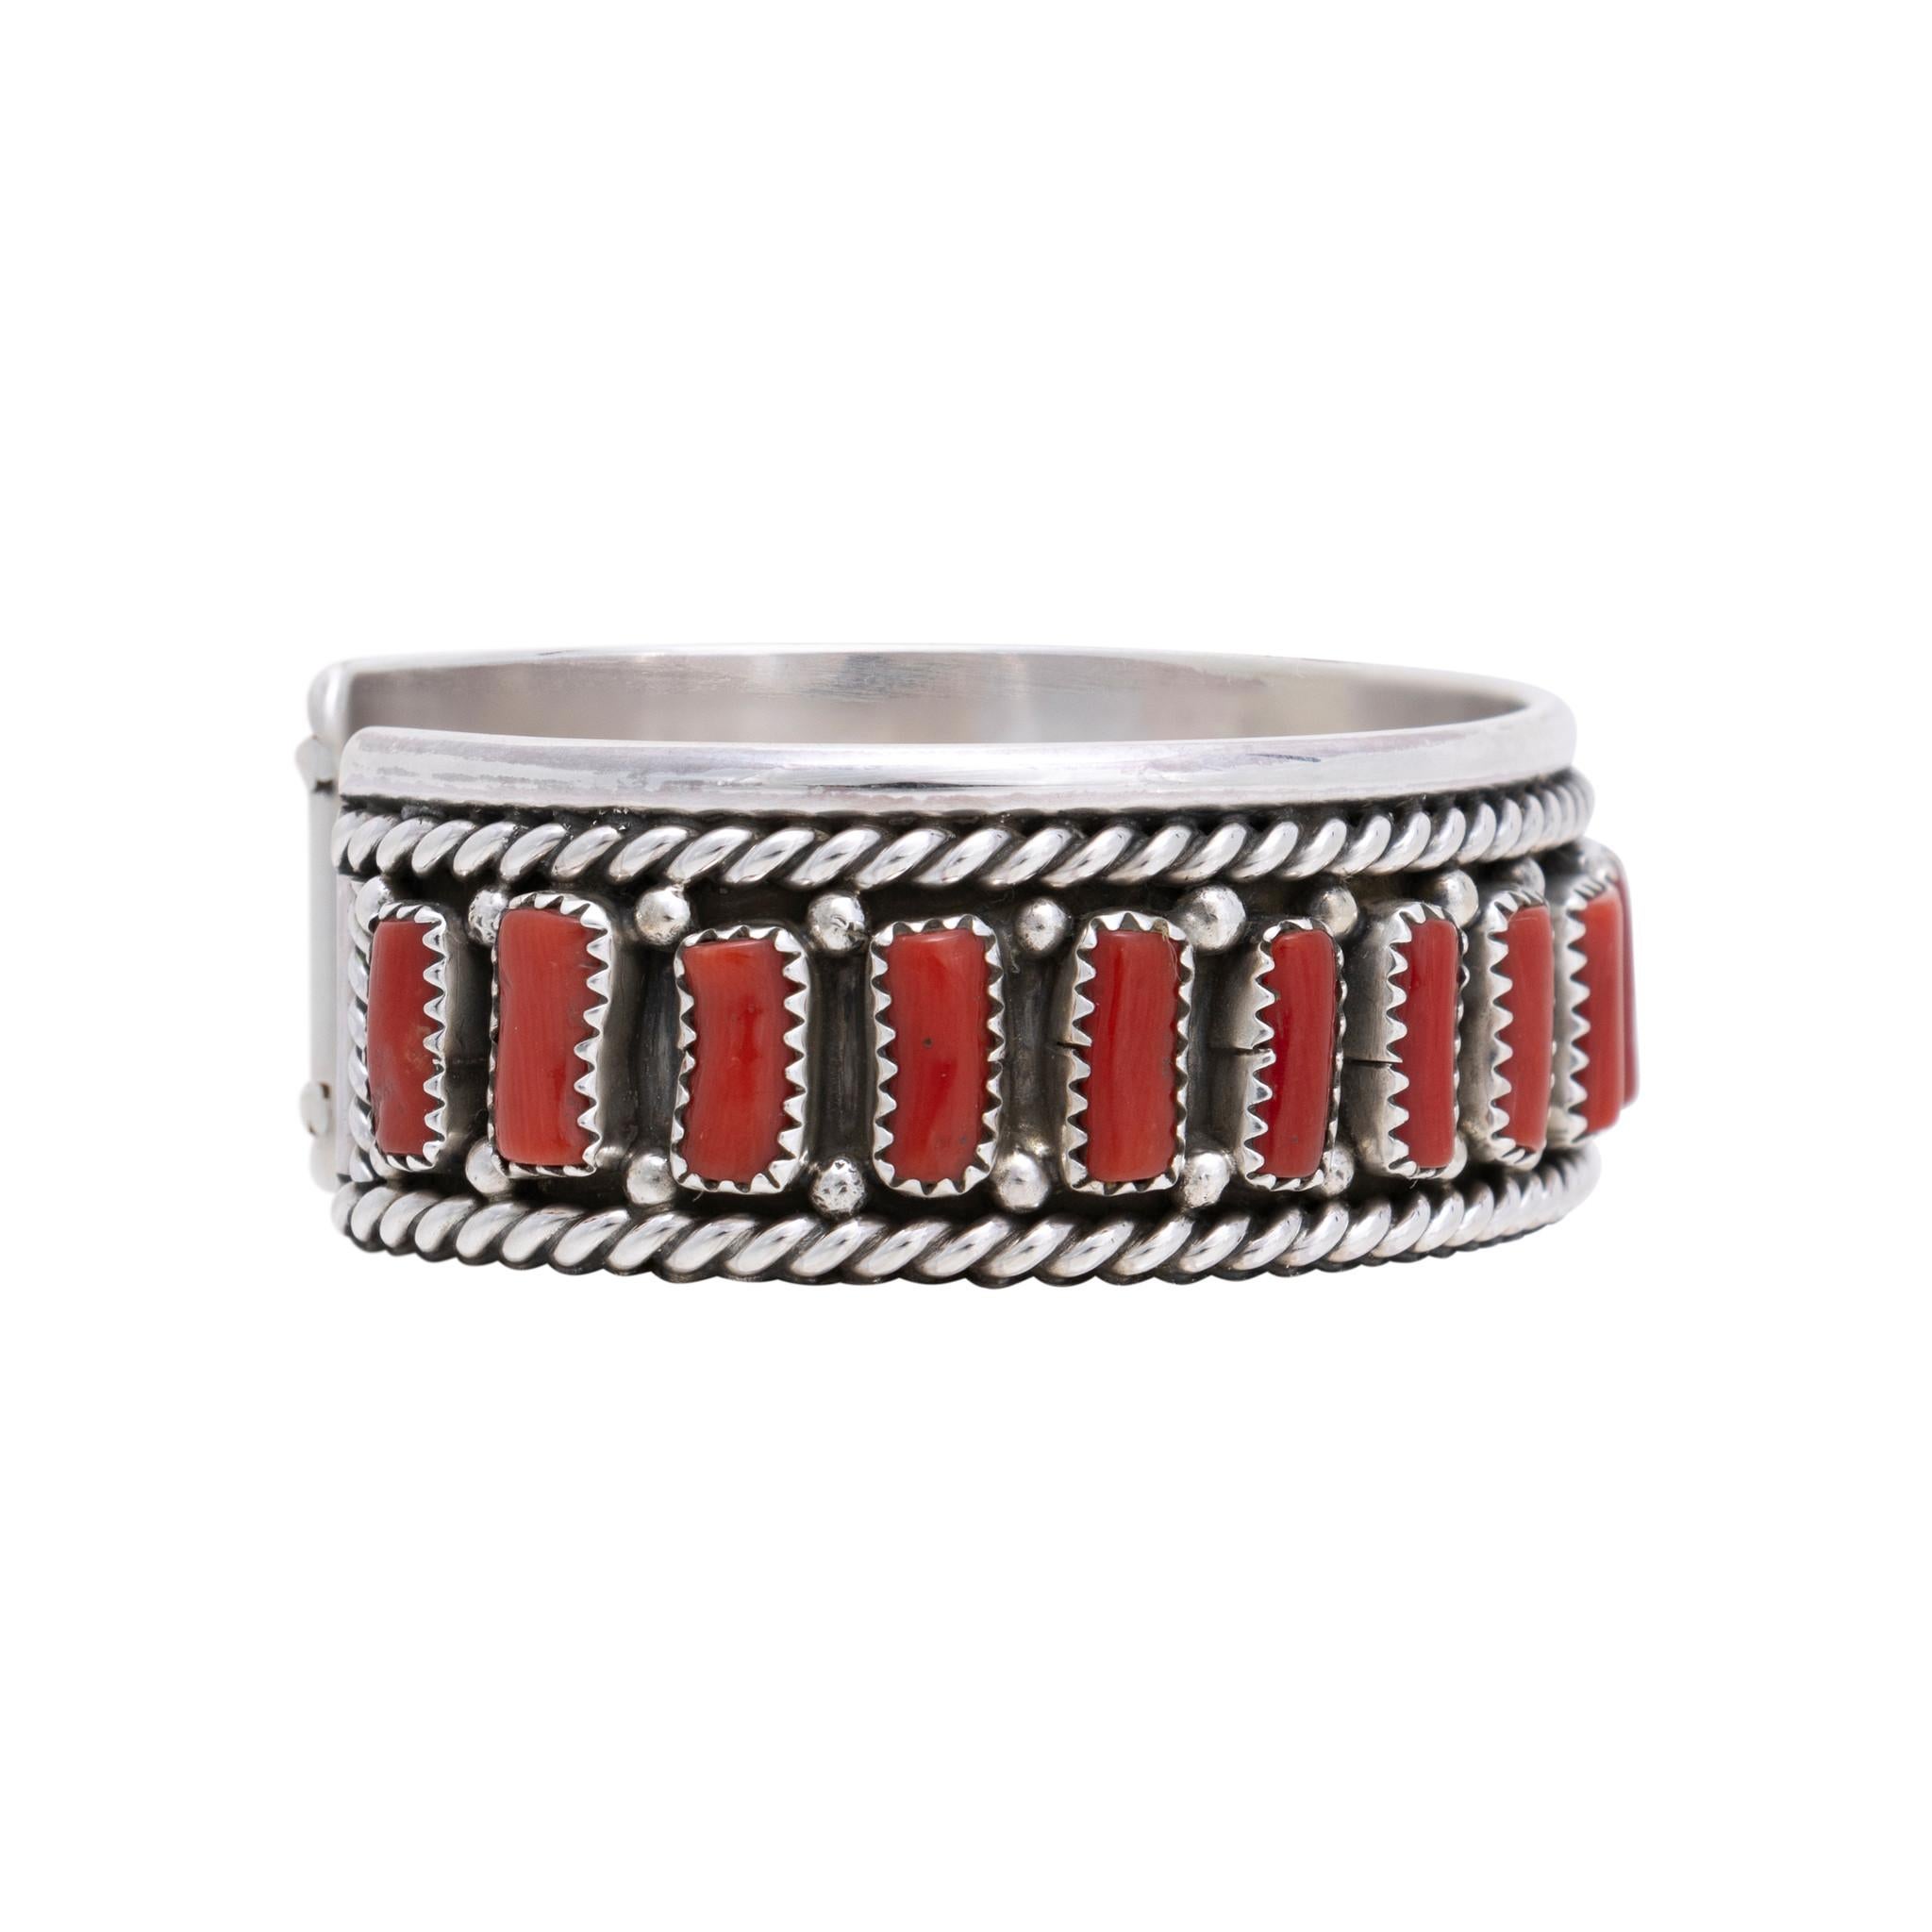 Native American Navajo Indian coral and sterling silver cuff bracelet by Chester Charley. Beautiful bracelet featuring 21 premium grade coral stones set in shadow box with twisted rope and sterling bead border. Stones are a deep, rich red tone with